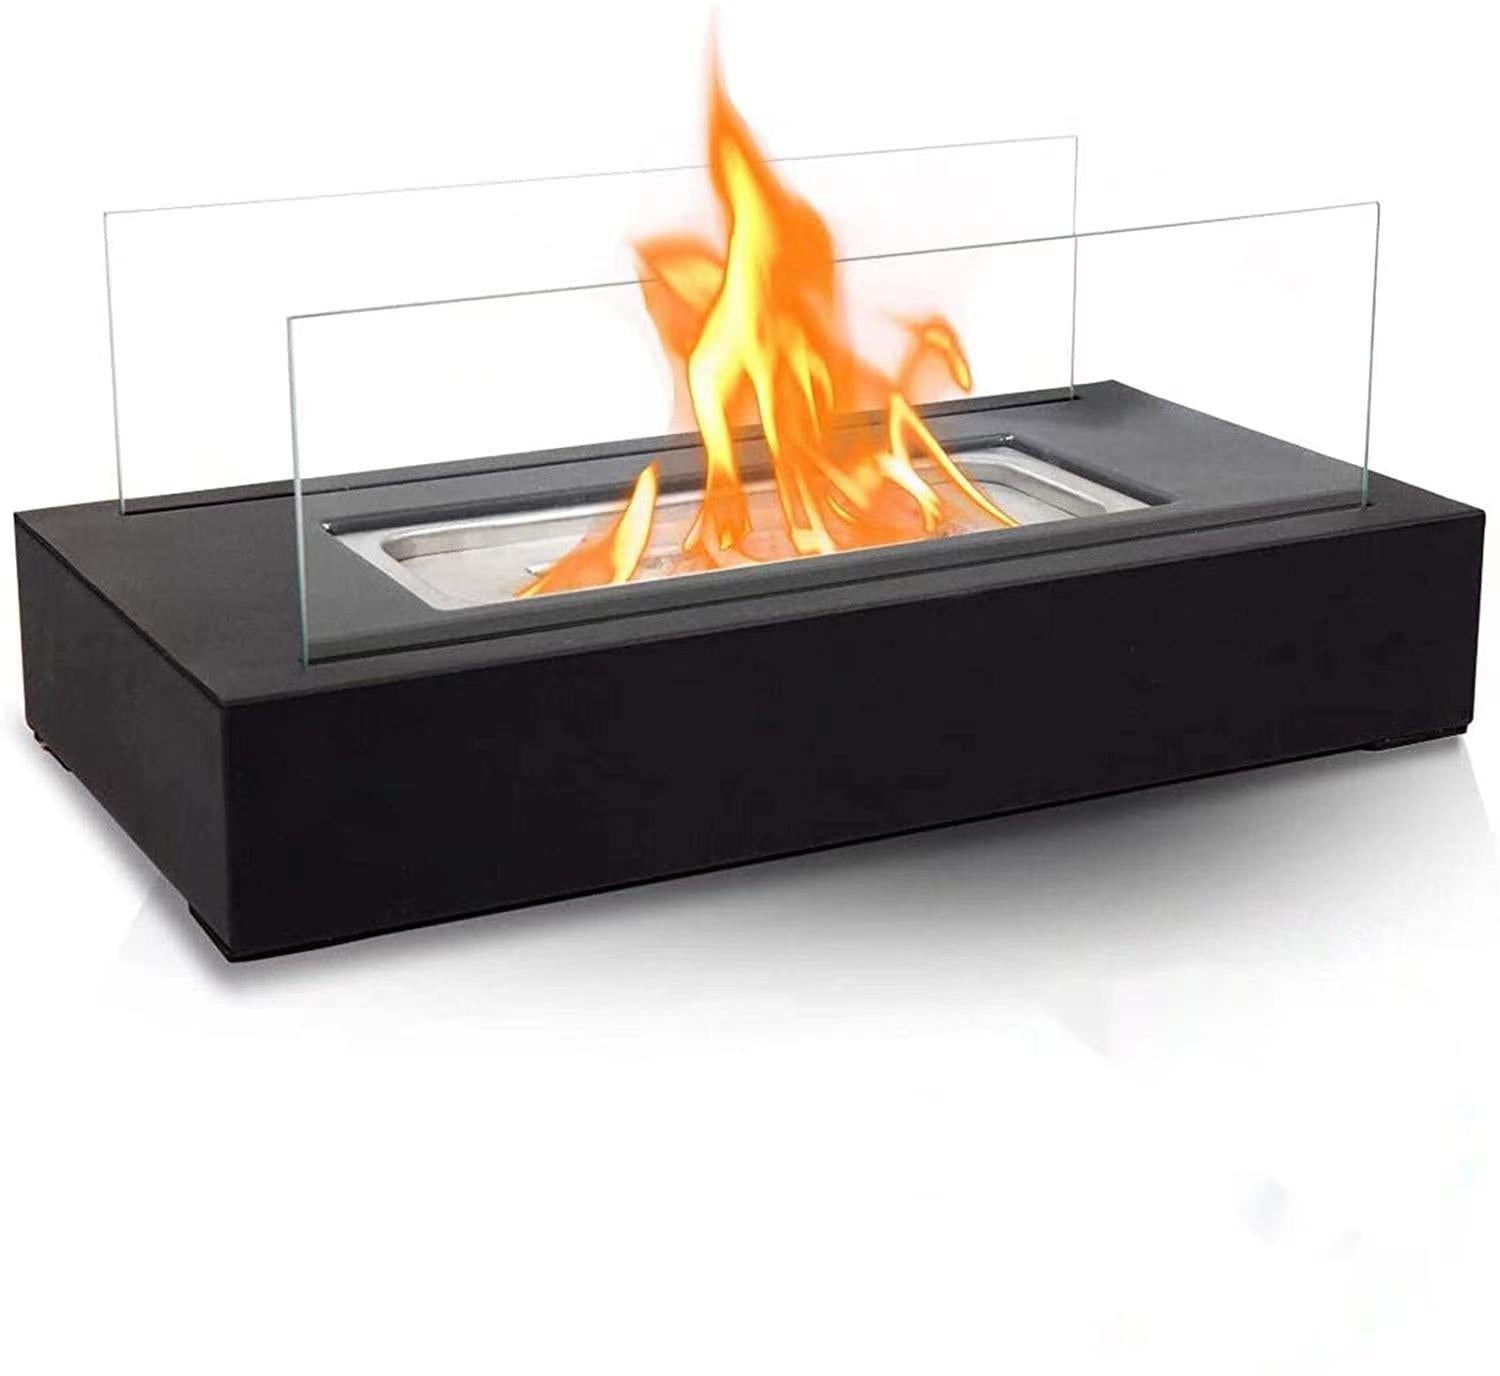 Table Fireplace - Discover Epic Goods